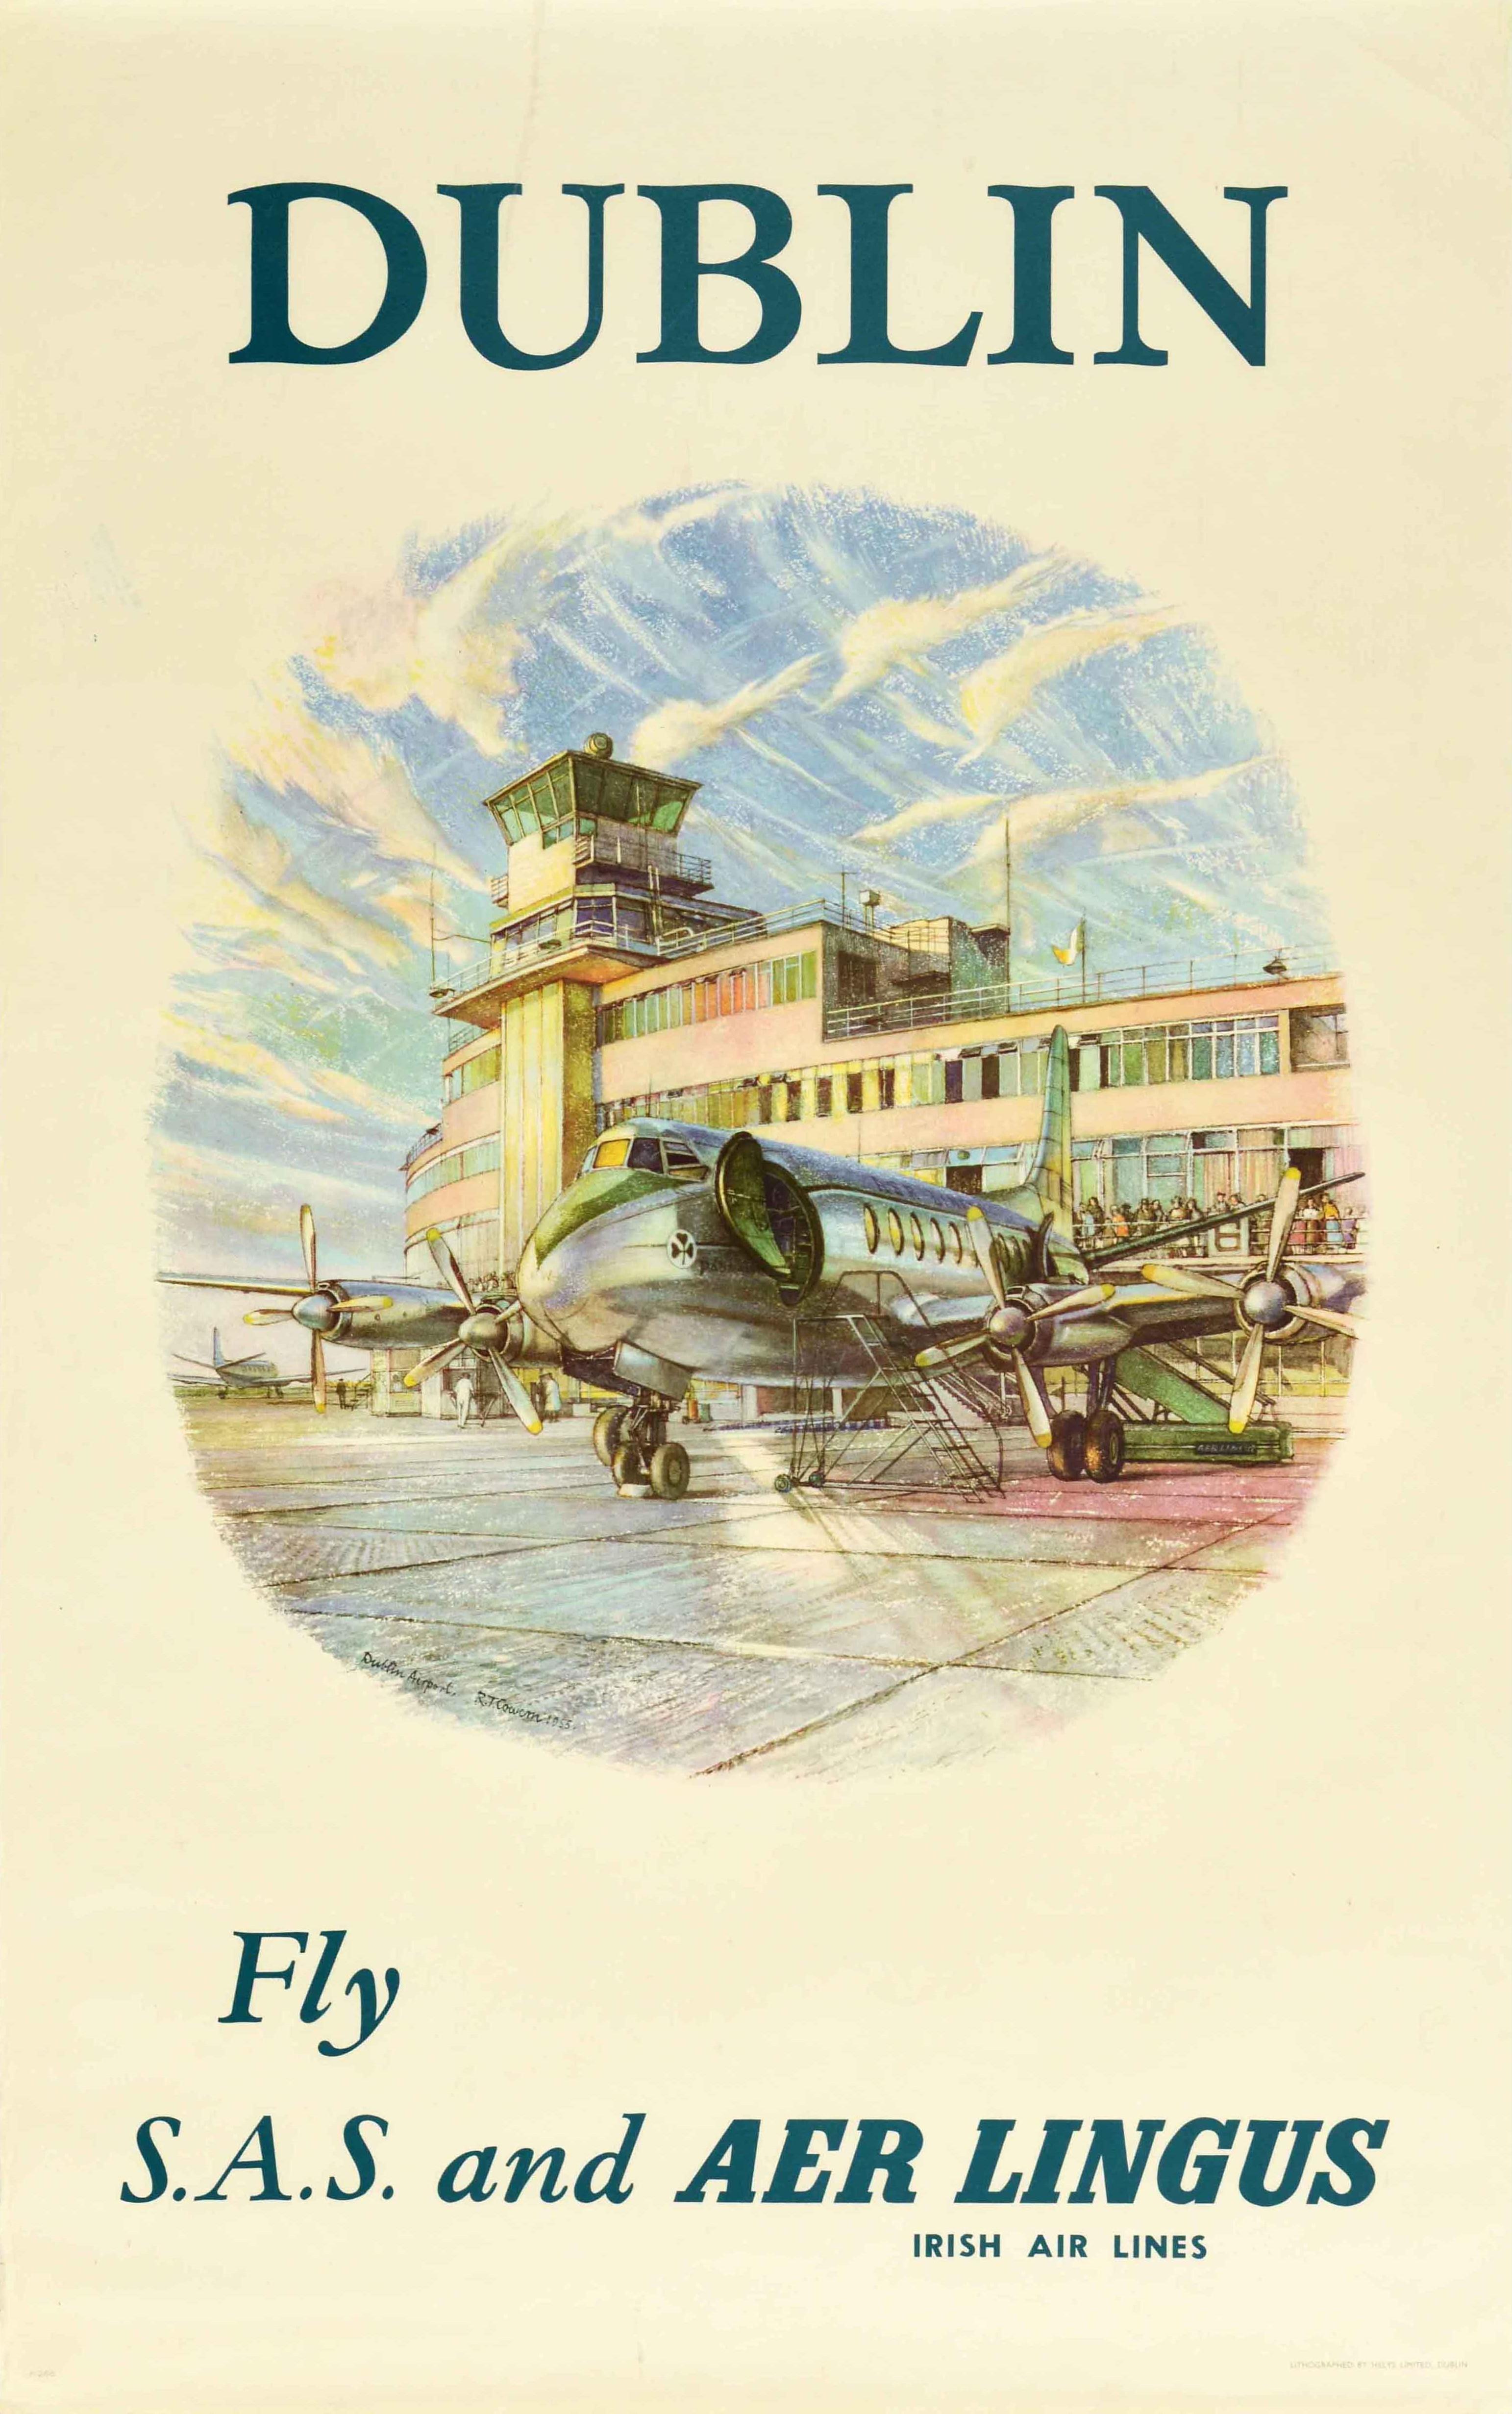 Original vintage travel poster - Dublin Fly S.A.S. and Aer Lingus Irish Air Lines - featuring artwork by the painter and etcher Raymond Teague Cowern (1913-1986) depicting a propeller plane with a shamrock logo on it, in the sun on the tarmac at